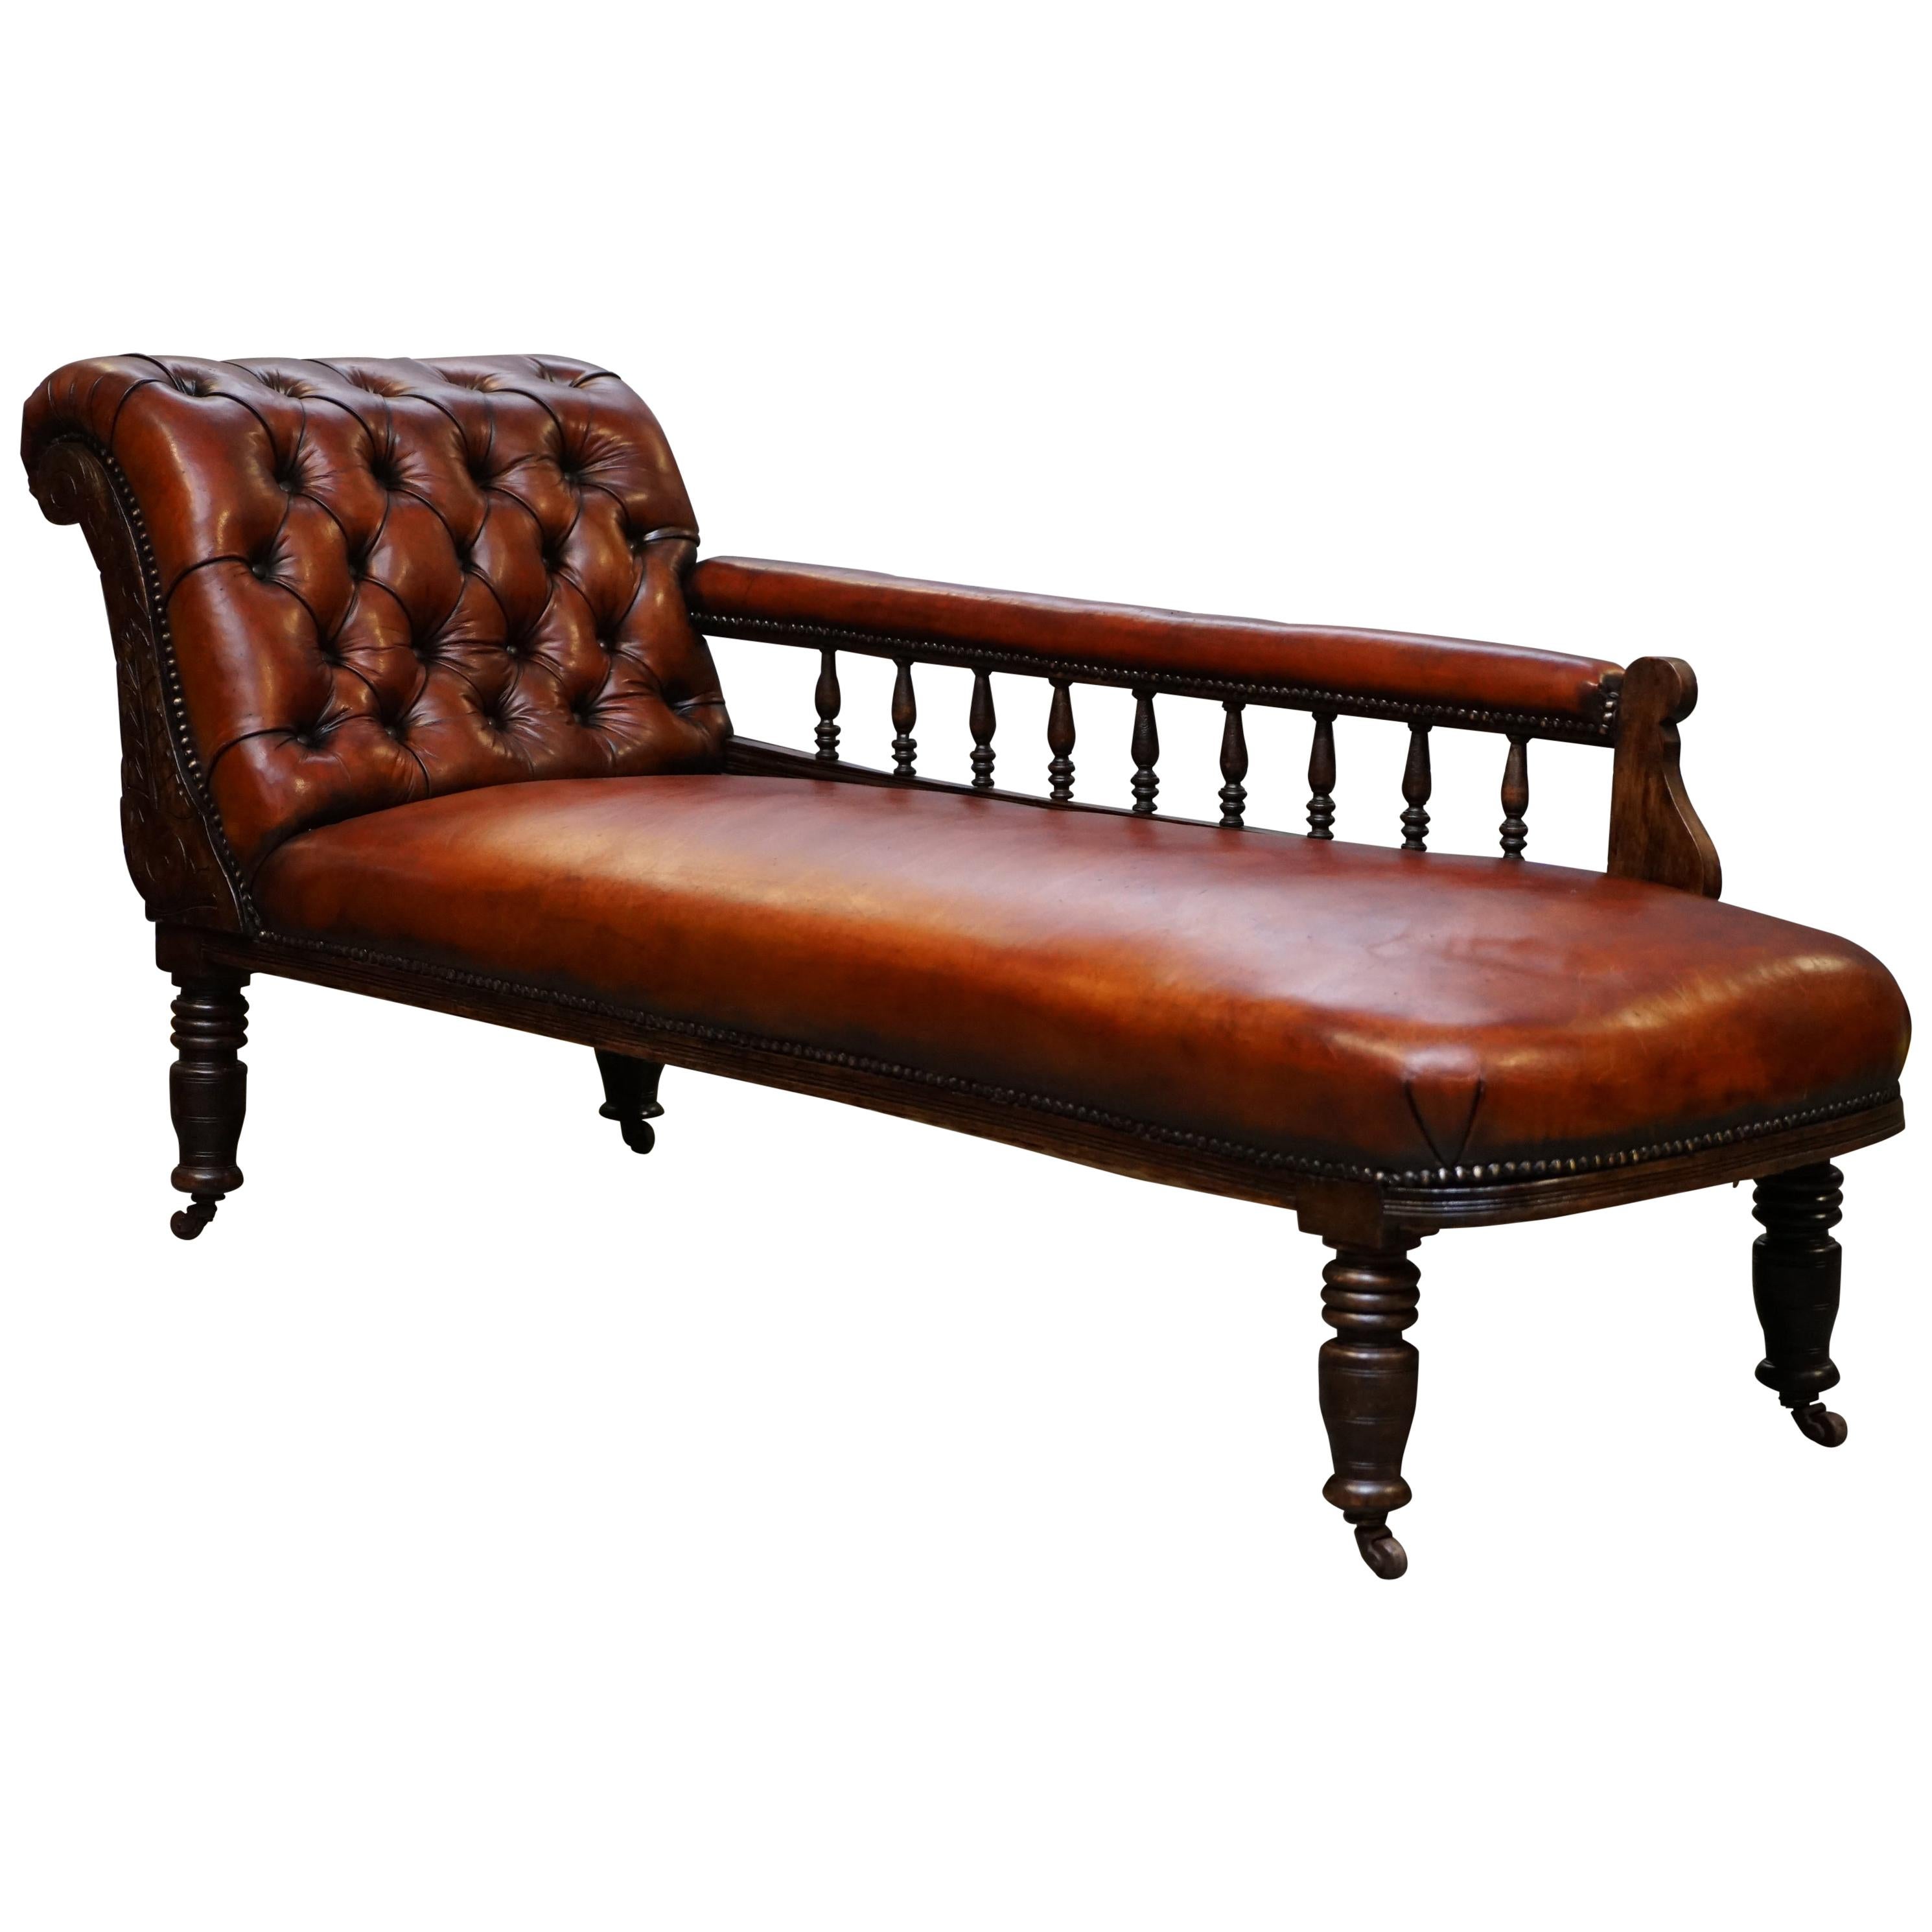 Lovely Restored Victorian Chesterfield Cigar Brown Leather Chaise Lounge Daybed For Sale